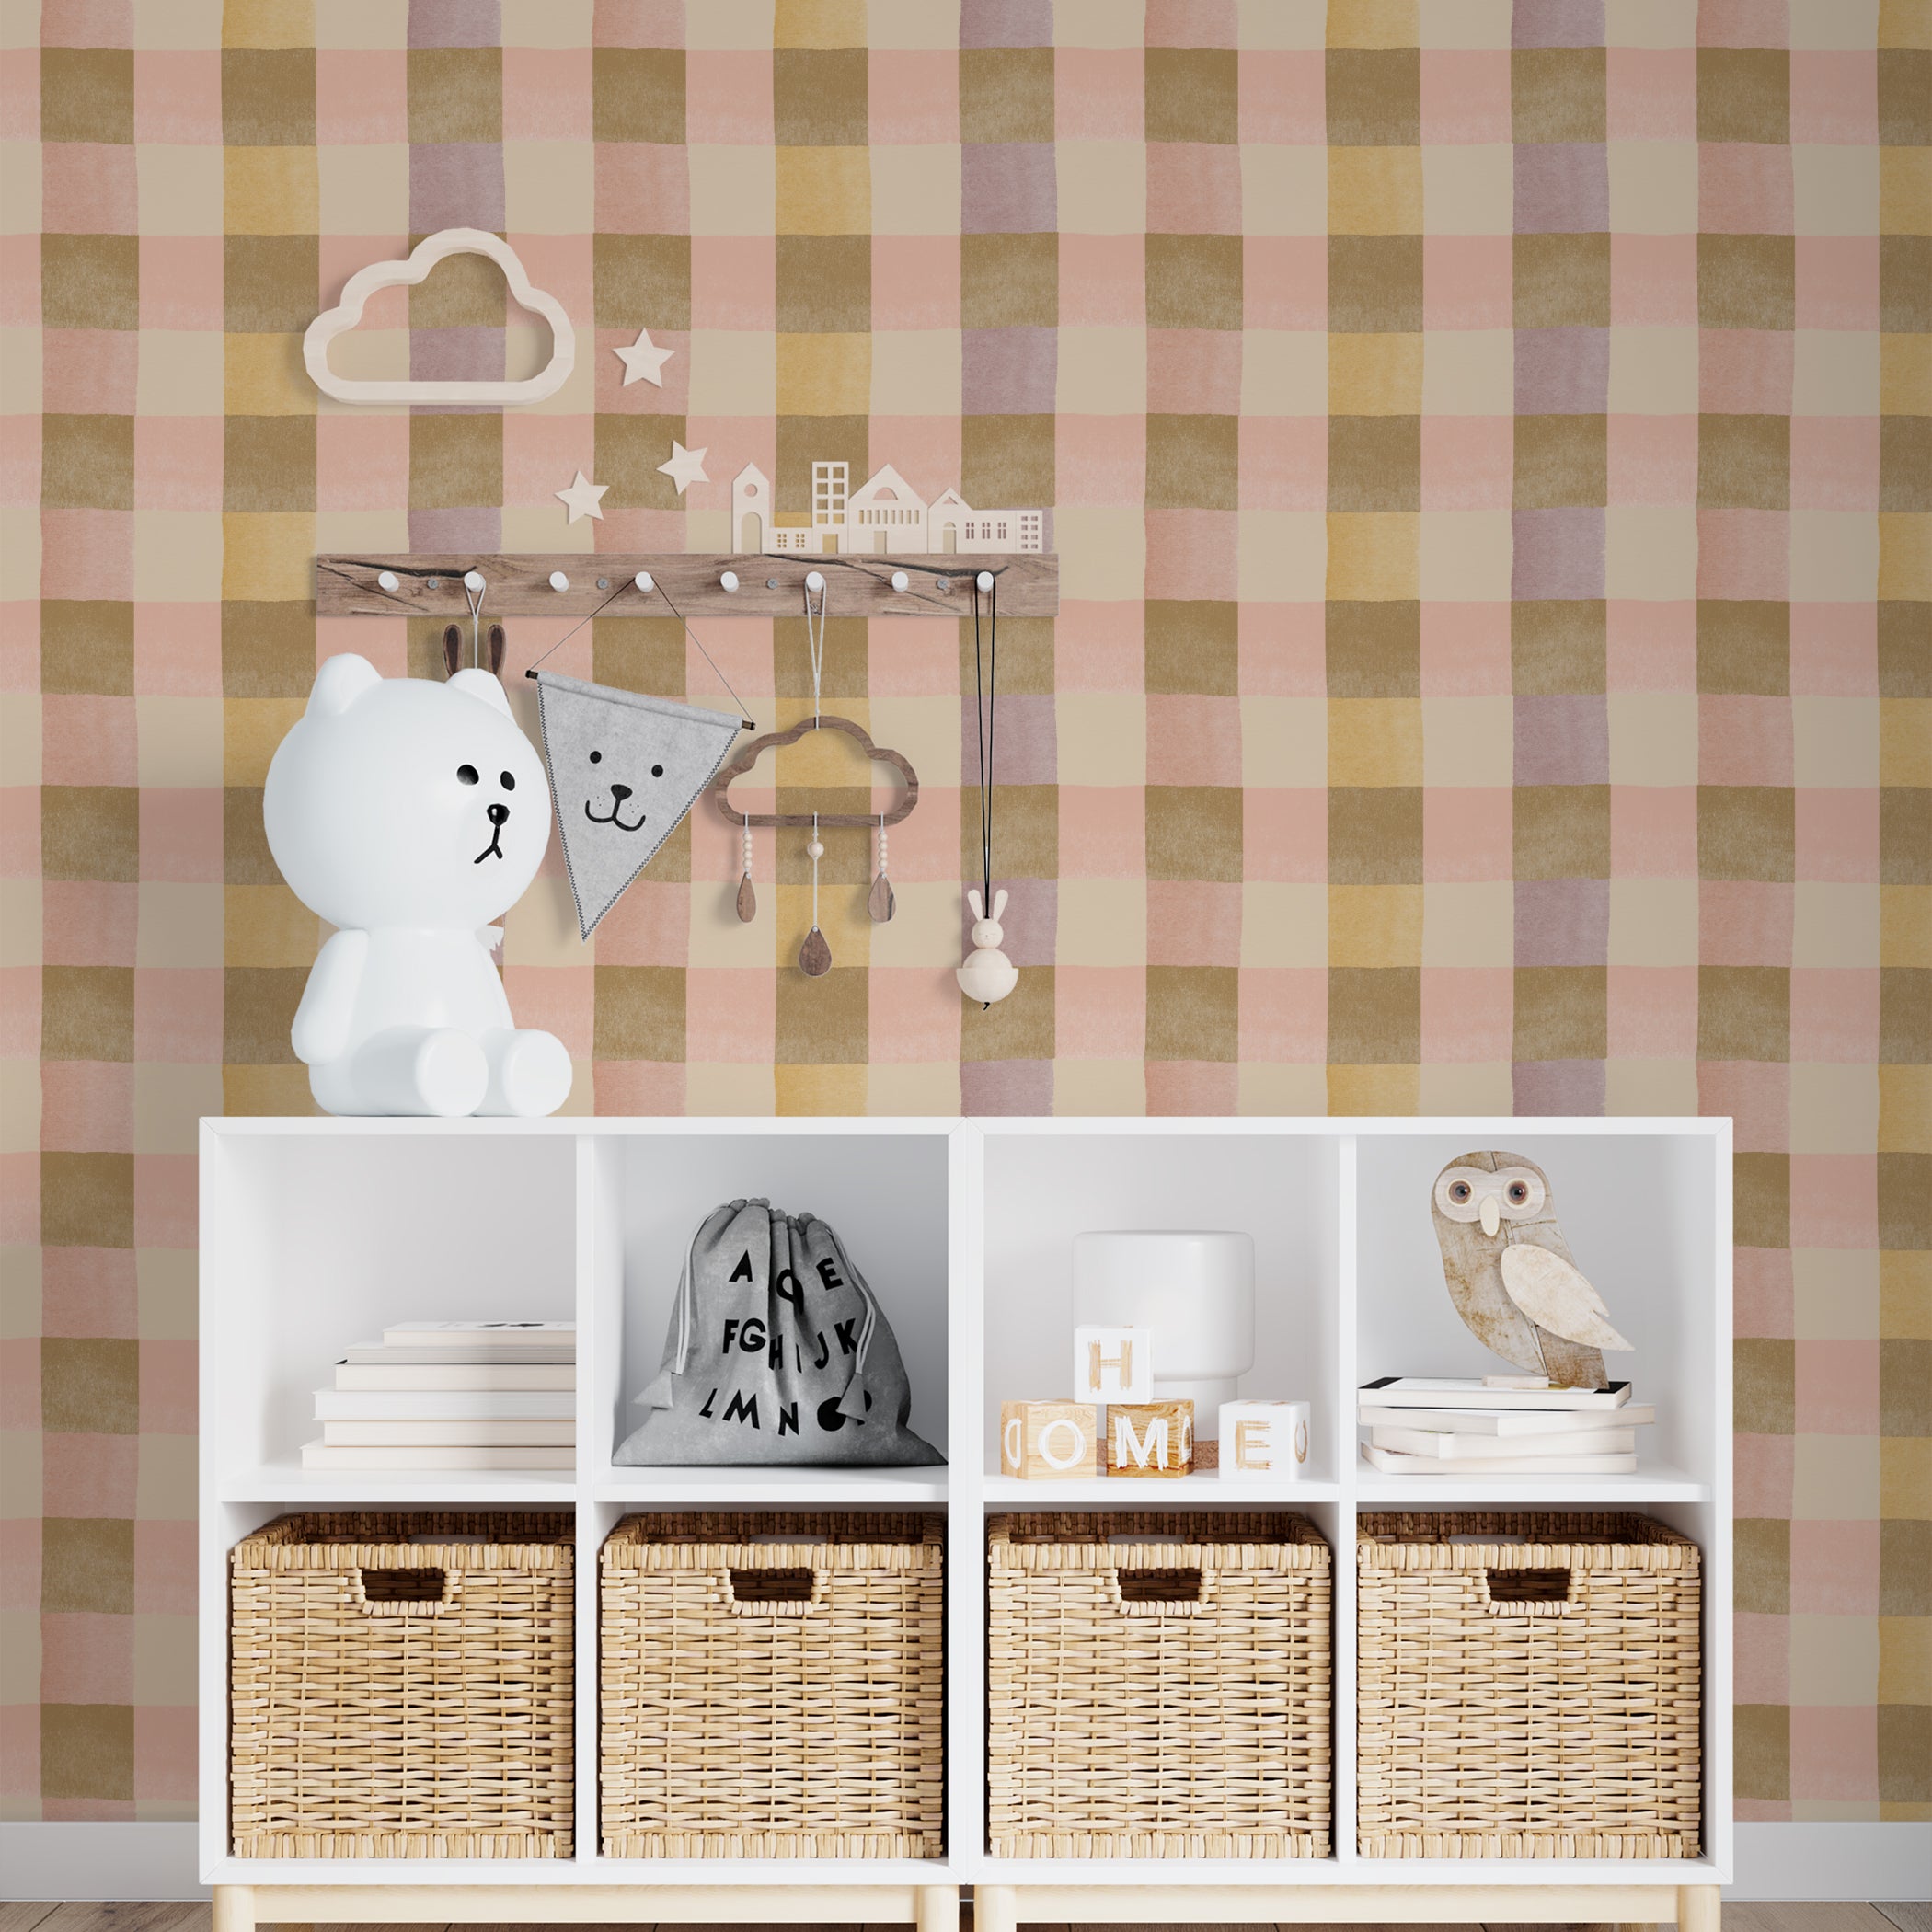 A nursery room wall adorned with Chloé Wallpaper, displaying a checkered pattern in pastel hues. The wall enhances the playful and calming environment, complemented by white shelves with children’s toys and decorative items